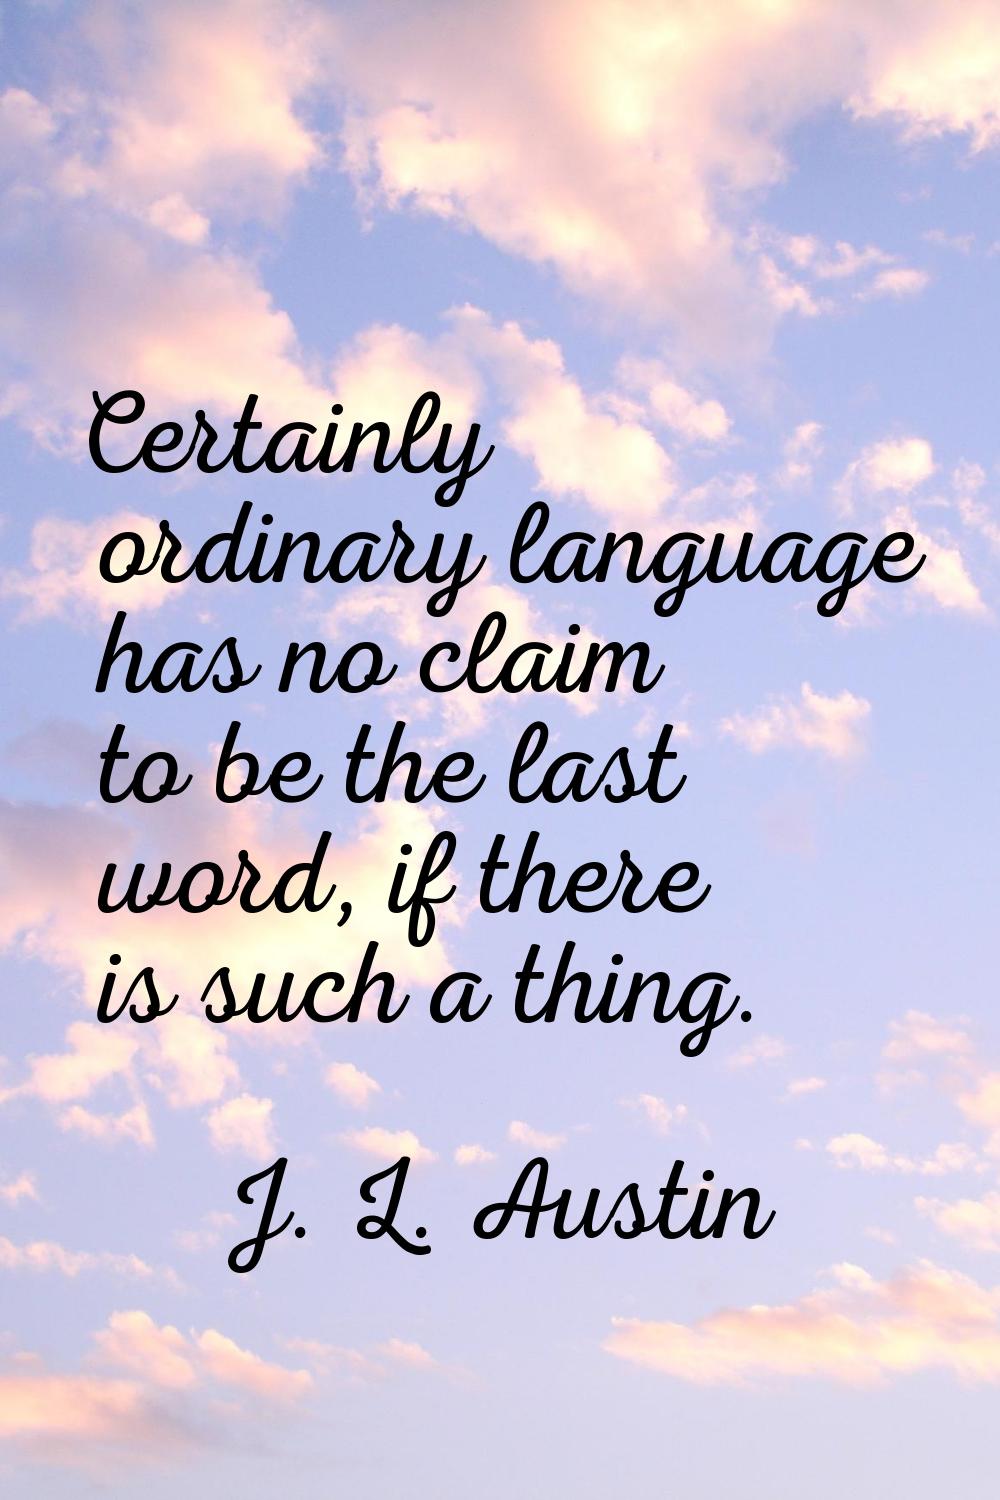 Certainly ordinary language has no claim to be the last word, if there is such a thing.